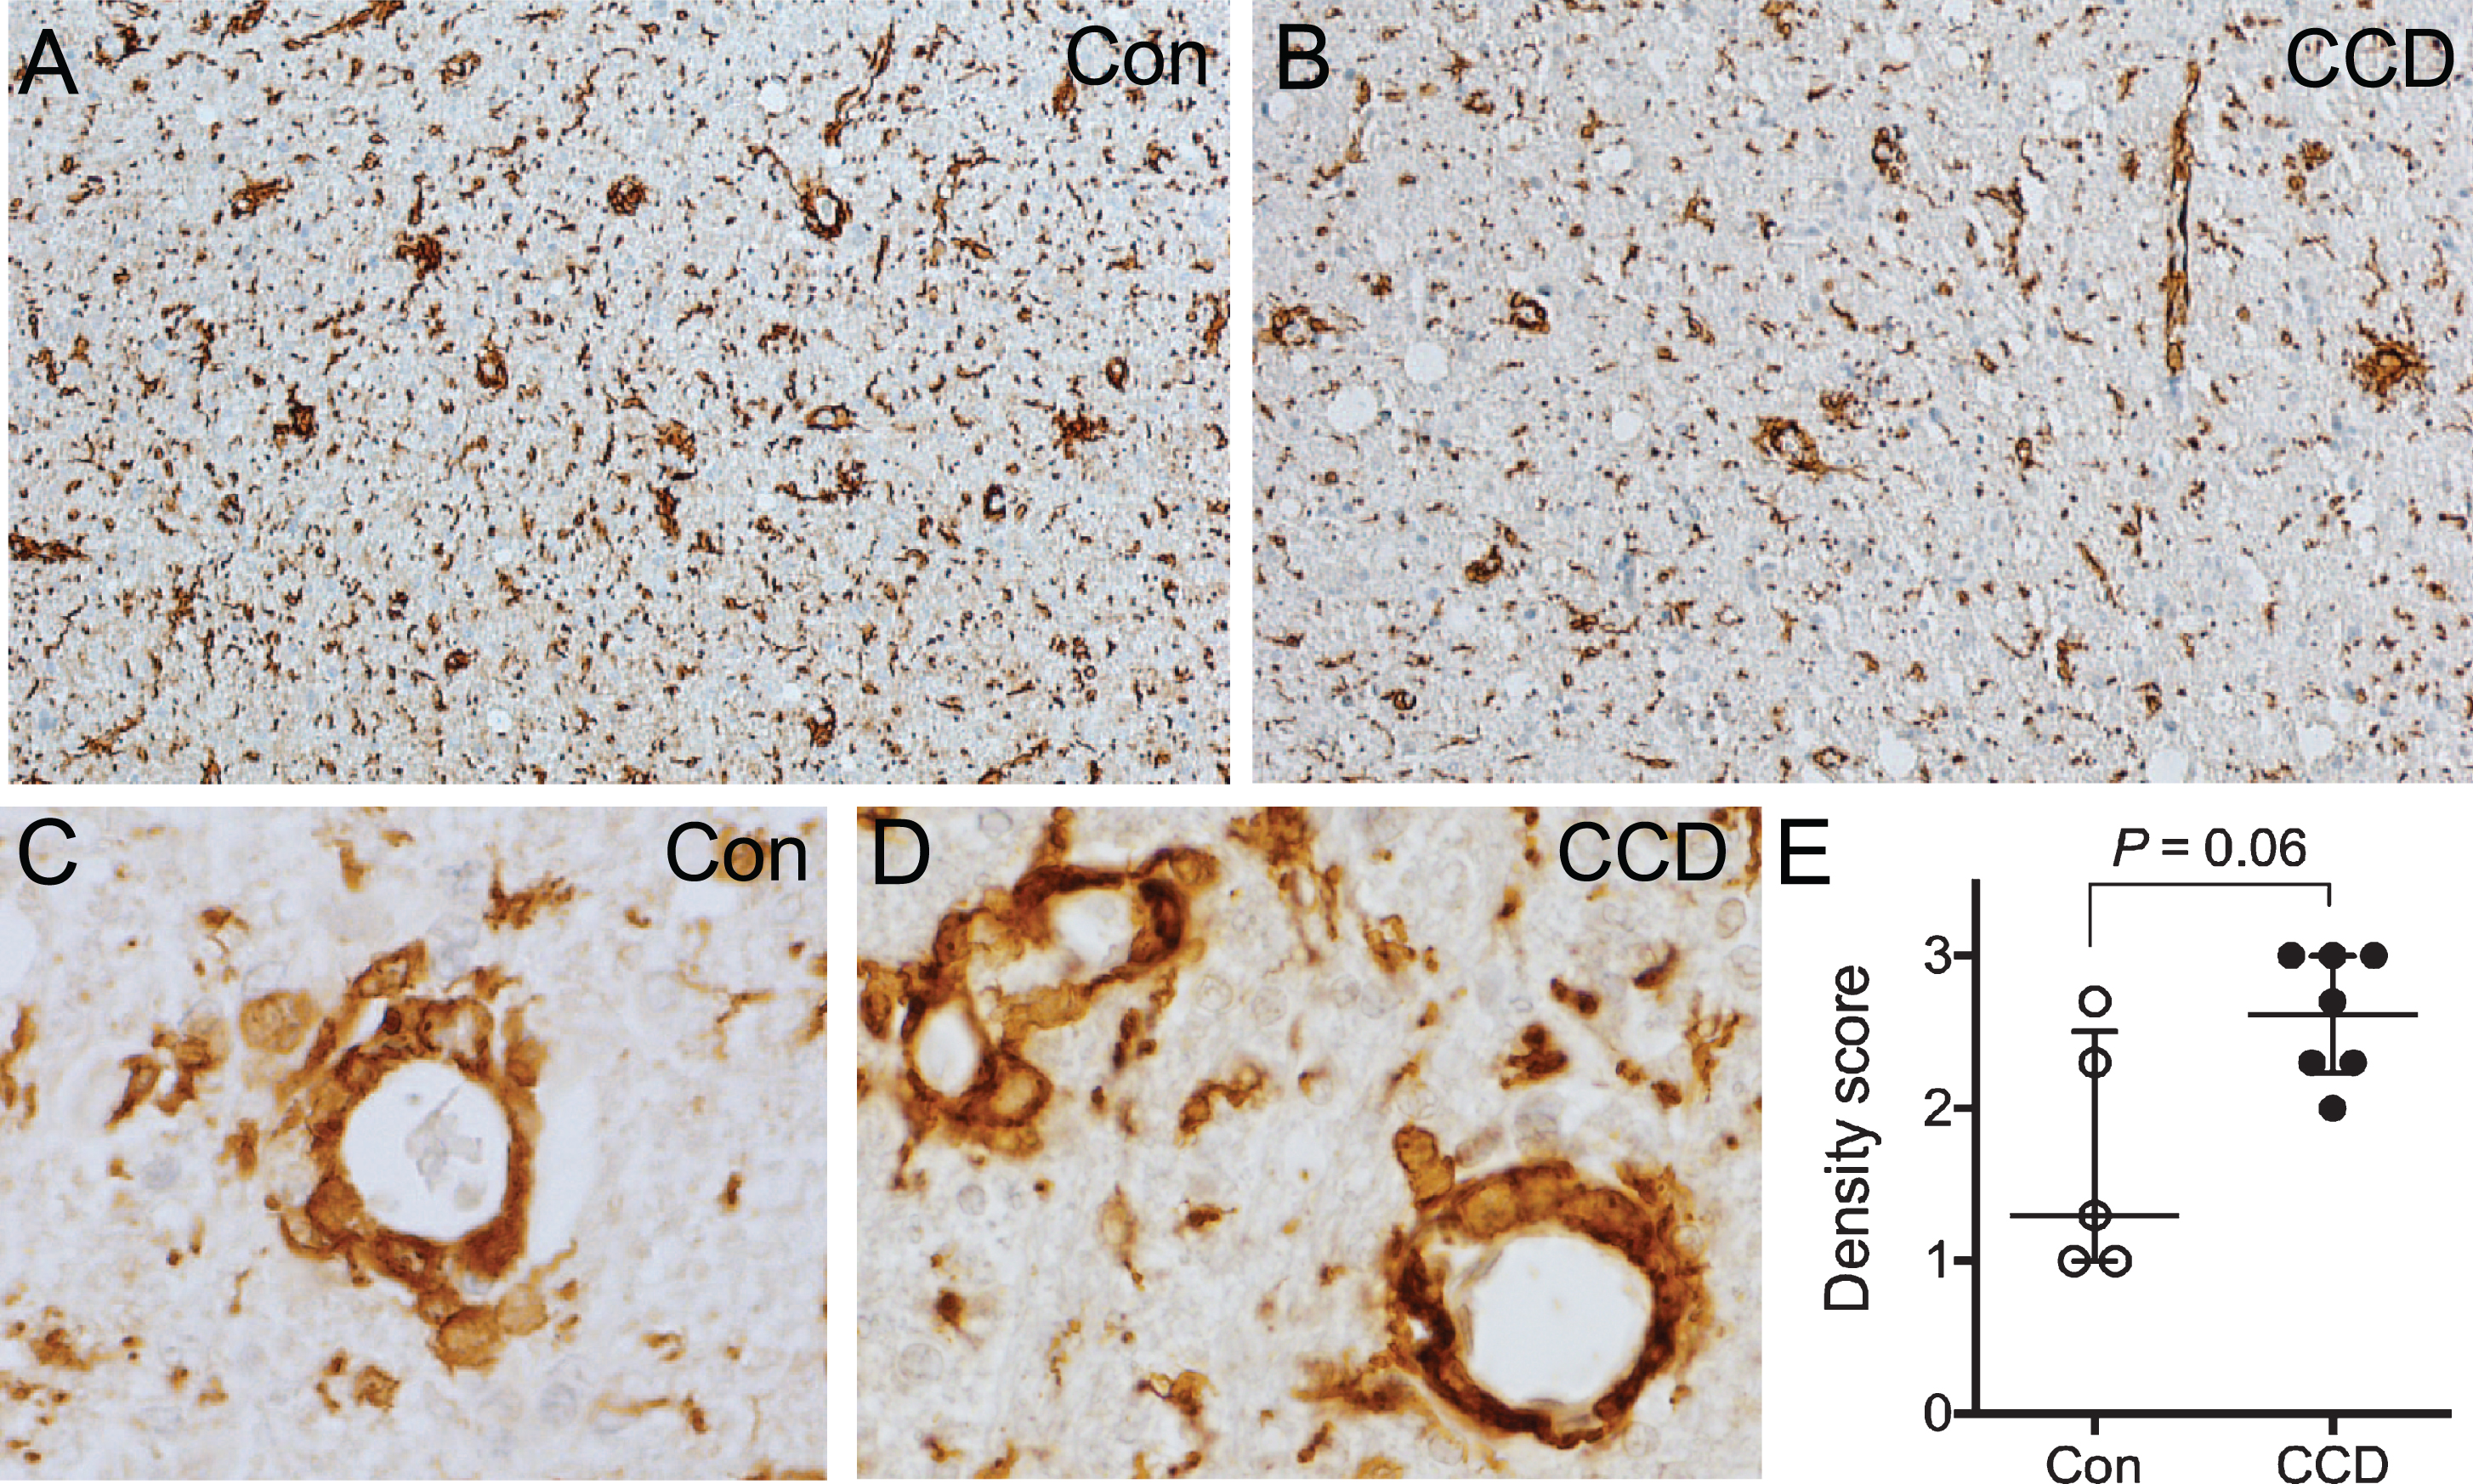 Perivascular macrophage infiltrates in the subcortical white matter. A, B) Overview of the subcortical white matter showing Iba1+ perivascular macrophages in a control dog (A), and a CCD dog (B). C, D) High magnification of vessels surrounded by Iba1+ perivascular macrophages in a control dog (C) and a CCD dog (D) in subcortical white matter. E) Scoring of Iba1+ perivascular macrophages in subcortical white matter revealed a tendency towards a stronger perivascular macrophage infiltration in CCD dogs (Mann Whitney, p = 0.06). Con, n = 5; CCD, n = 7.